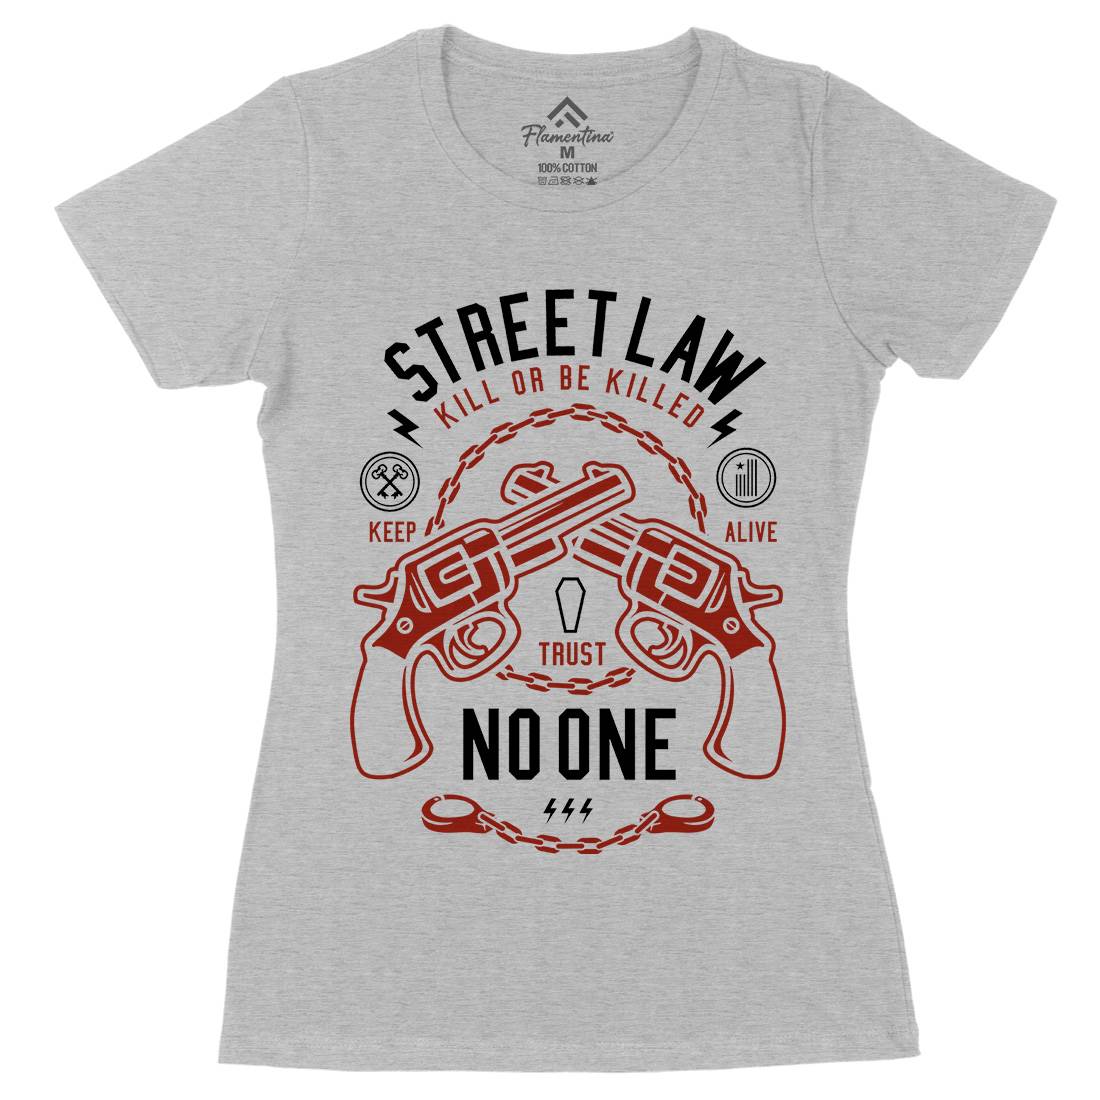 Street Law Womens Organic Crew Neck T-Shirt Quotes A286